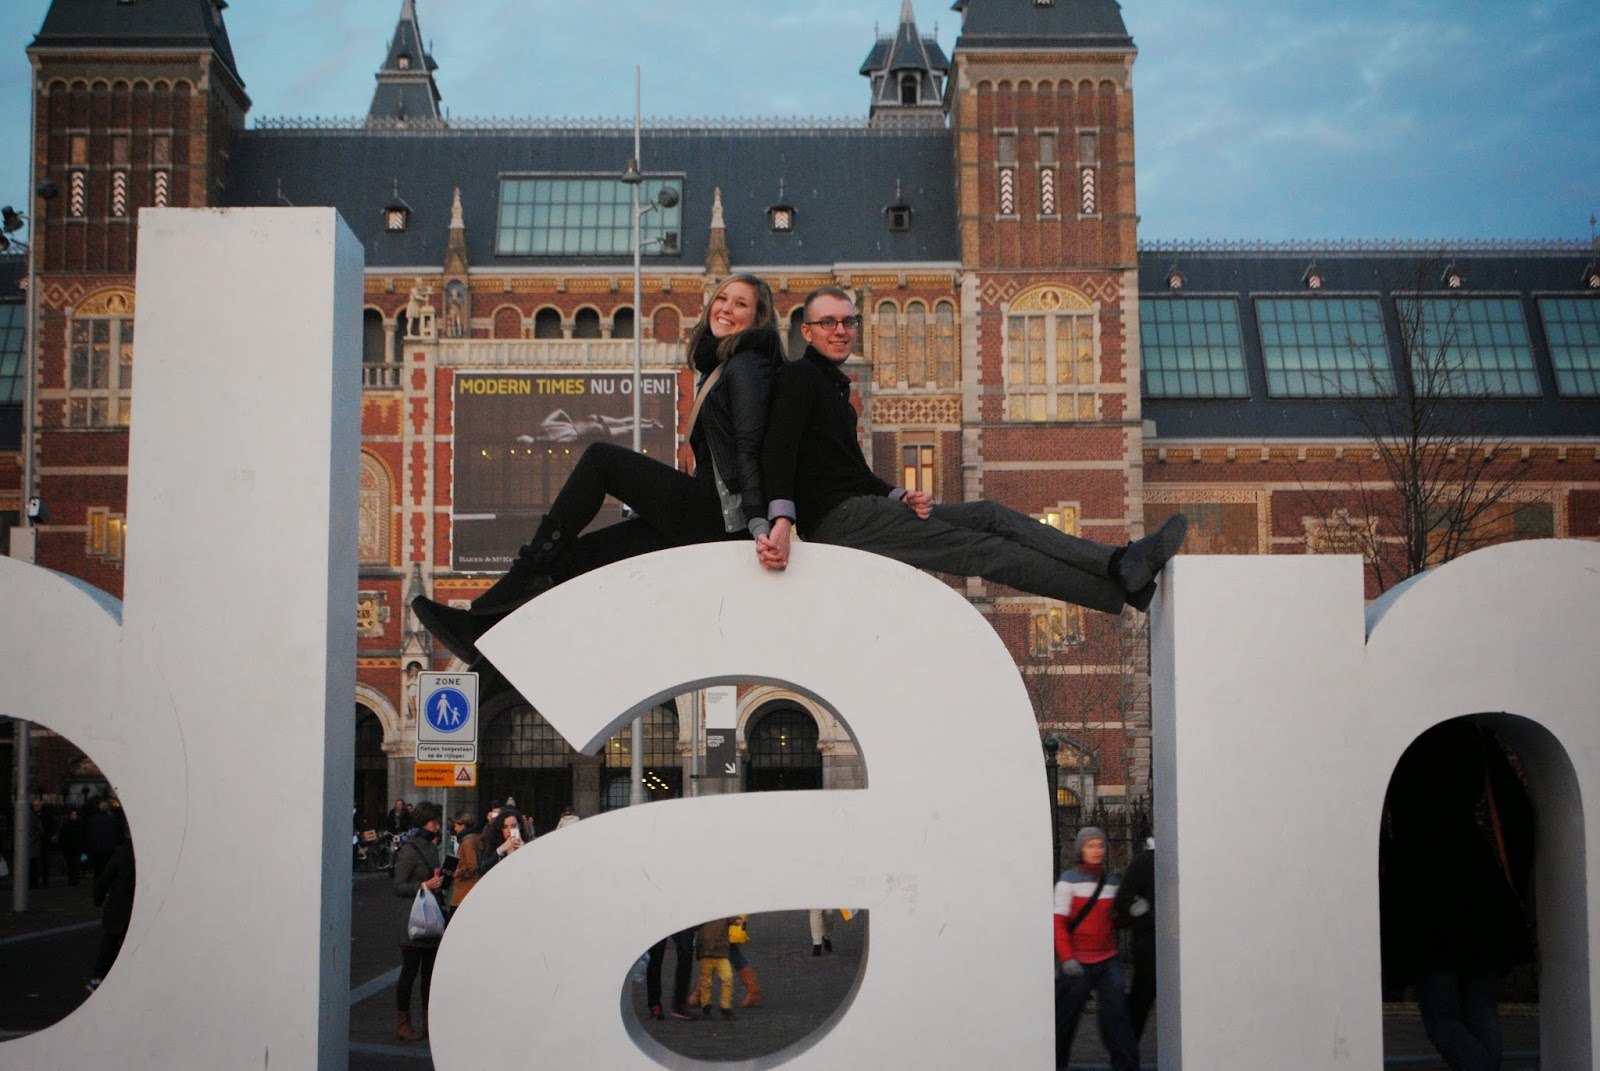 Erinn and Ben sitting on the "I amsterdam" sign in Amsterdam.